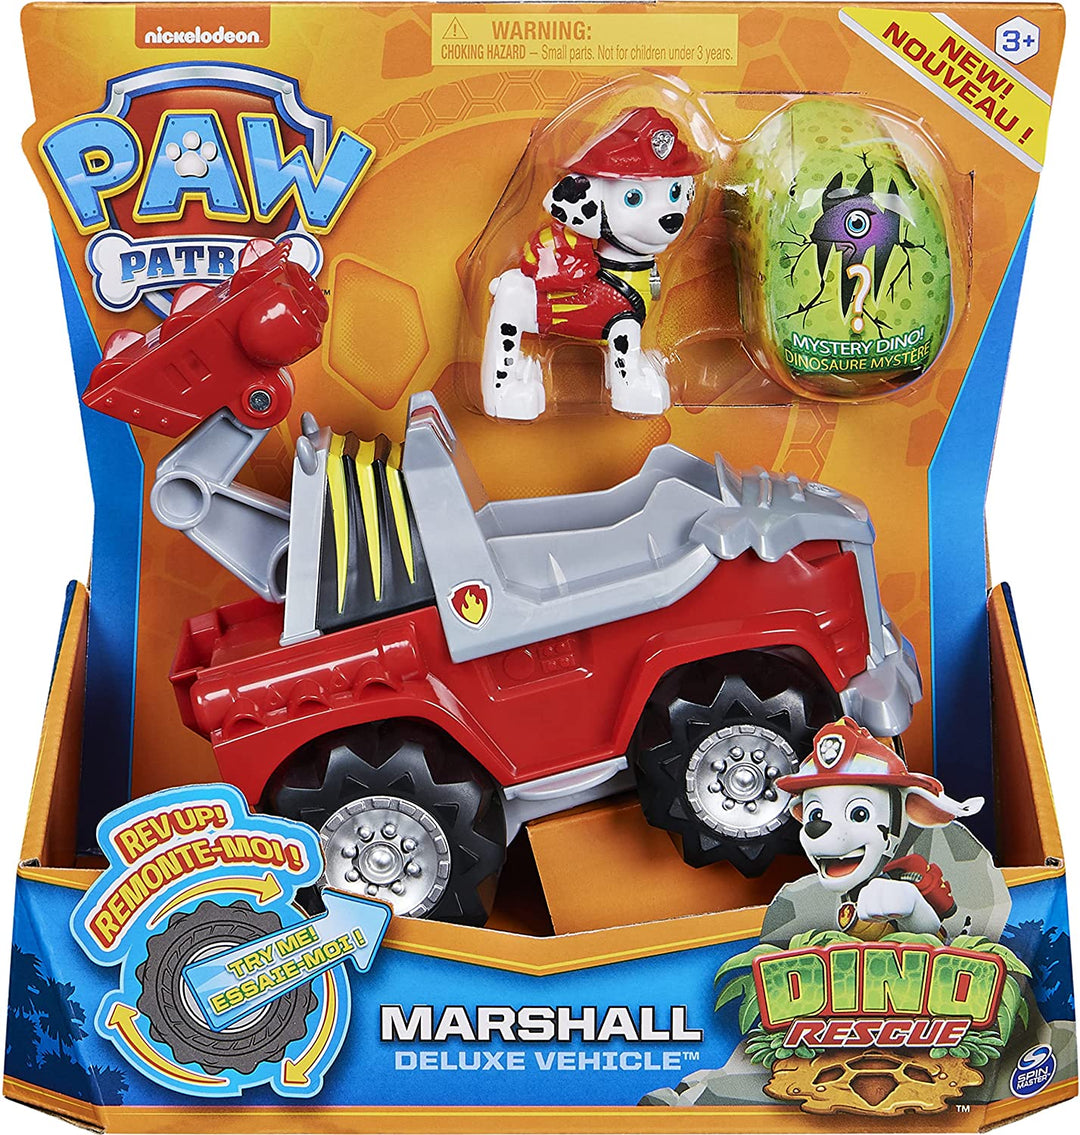 PAW Patrol, Dino Rescue Marshall’s Deluxe Rev Up Vehicle with Mystery Dinosaur